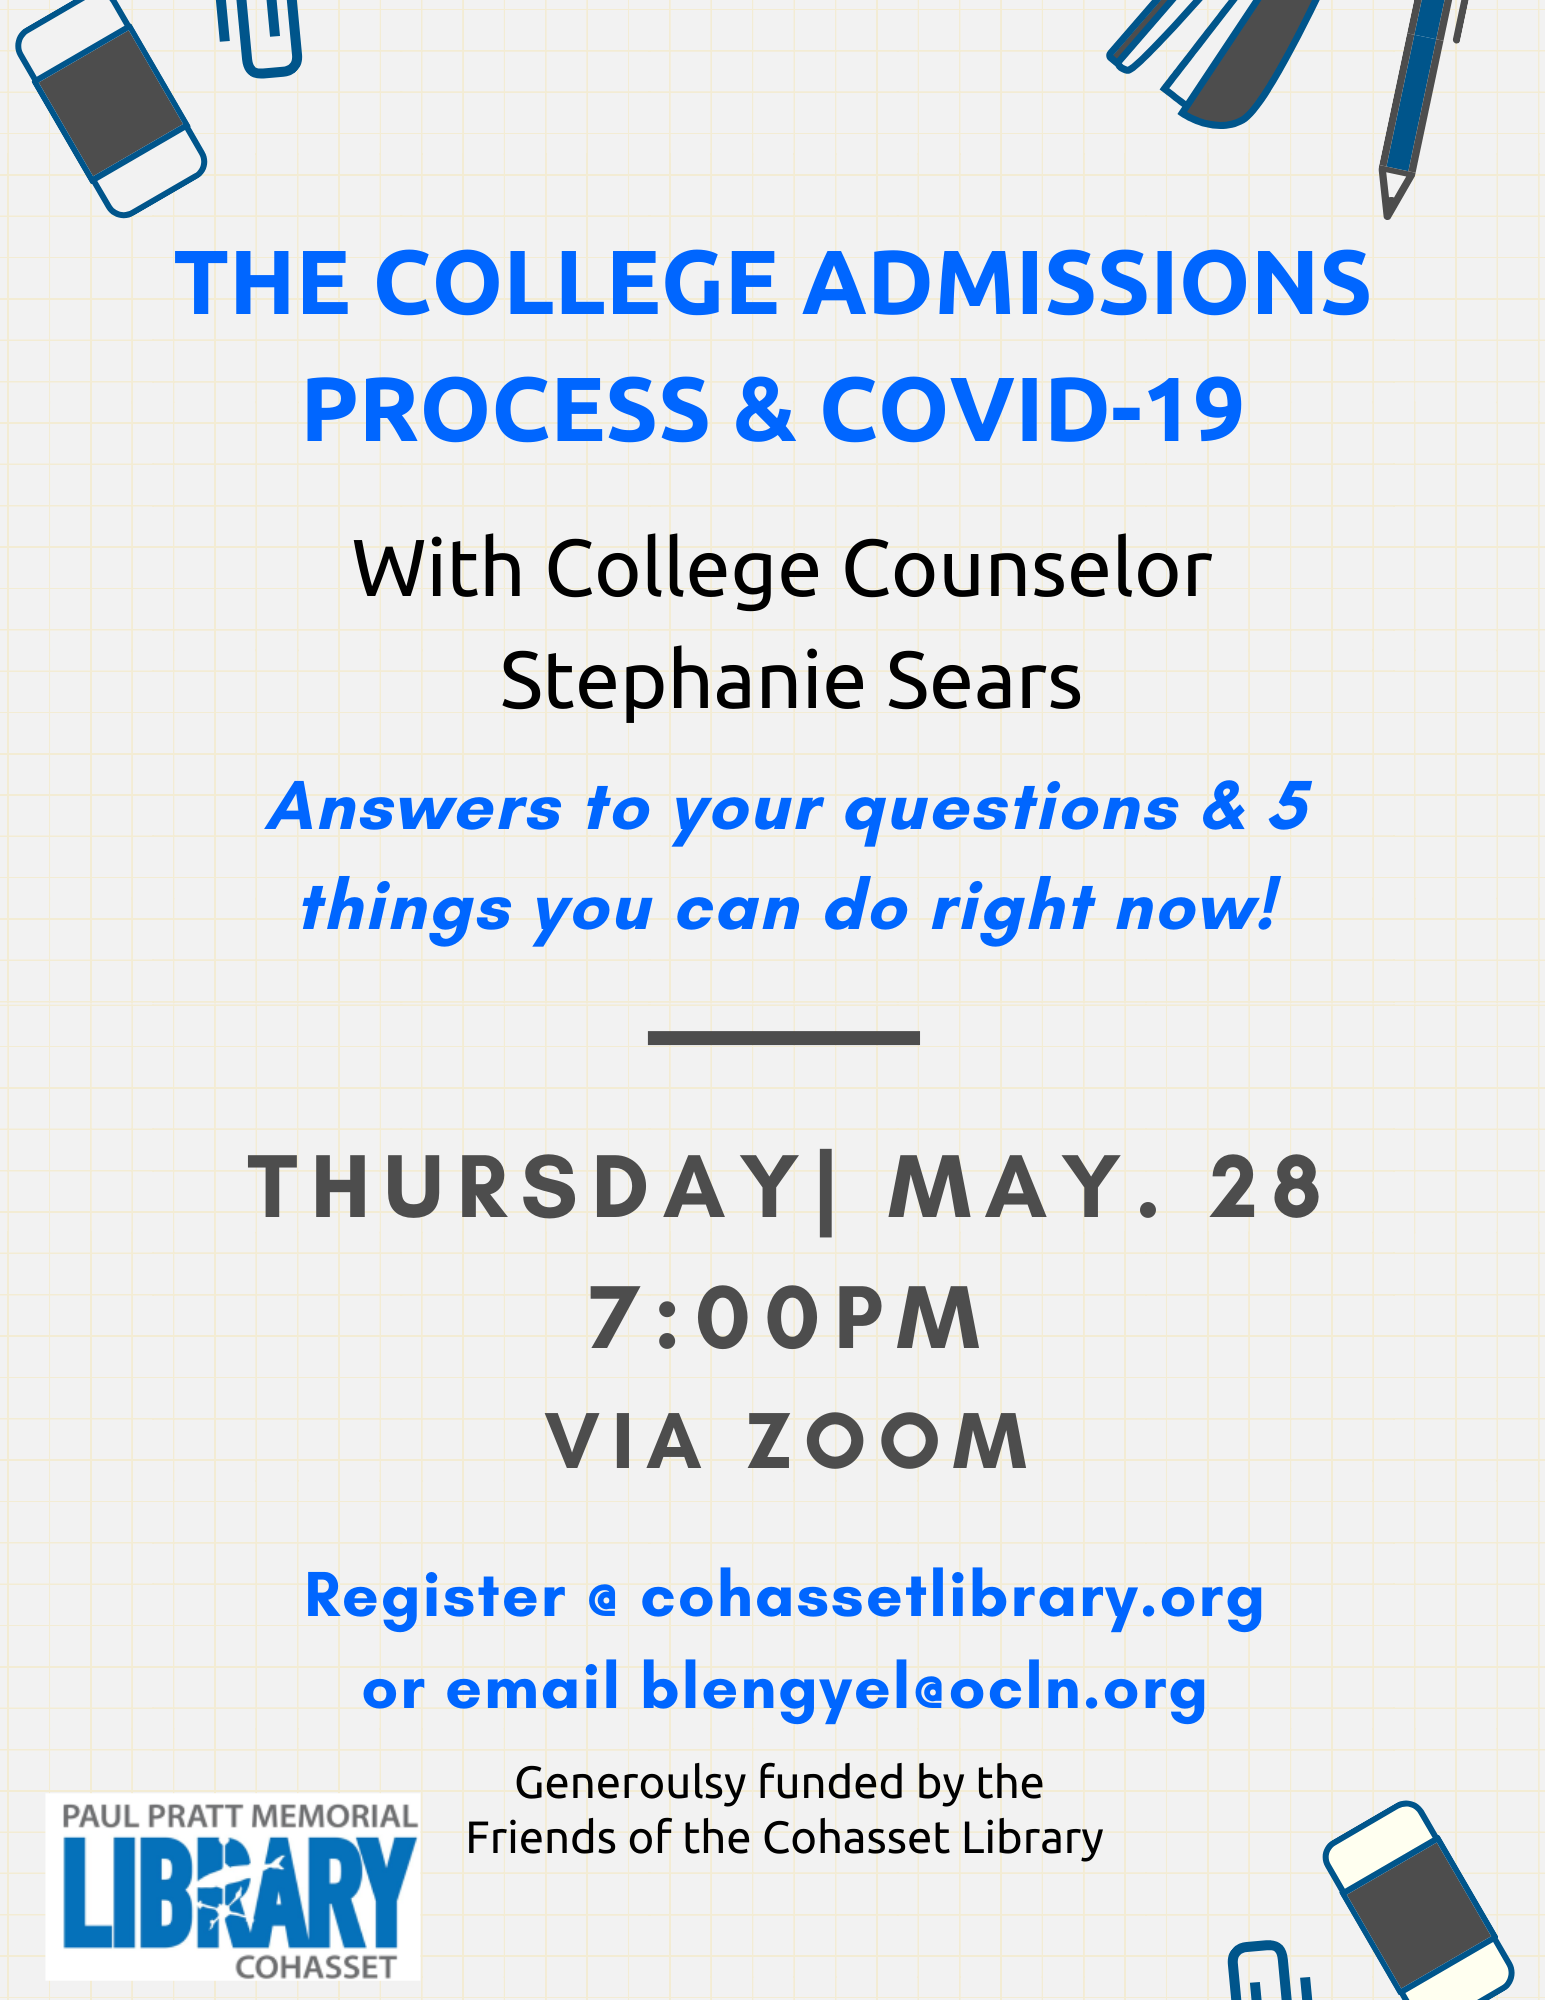 The College Admissions Process and COVID-19